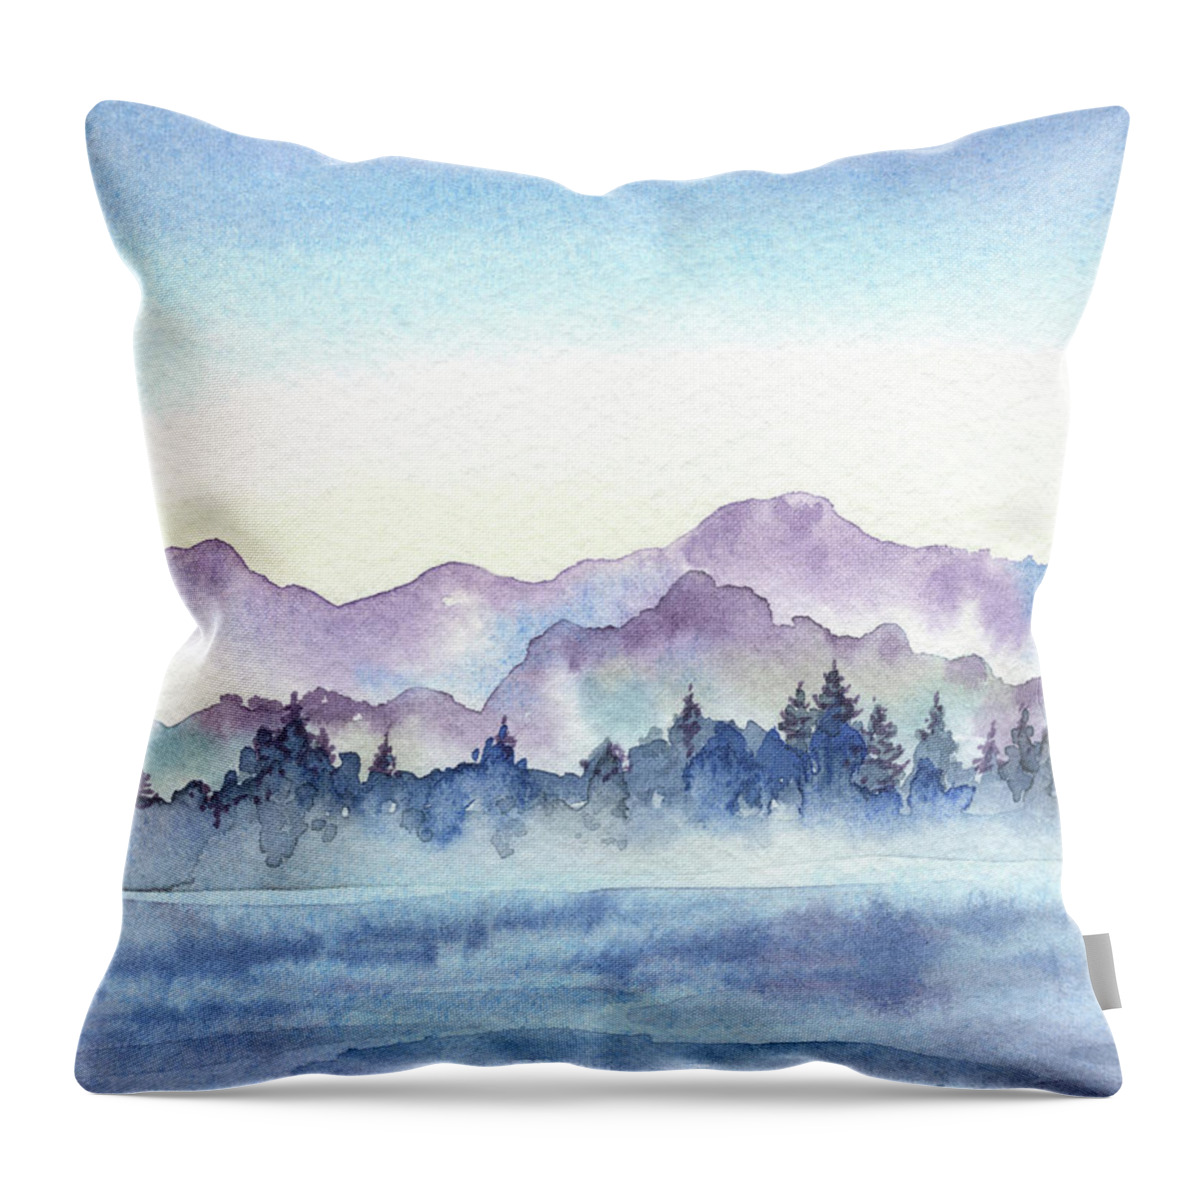 Pine Forest Throw Pillow featuring the painting Far Pine Trees Forest Foggy River Hills Watercolor by Irina Sztukowski